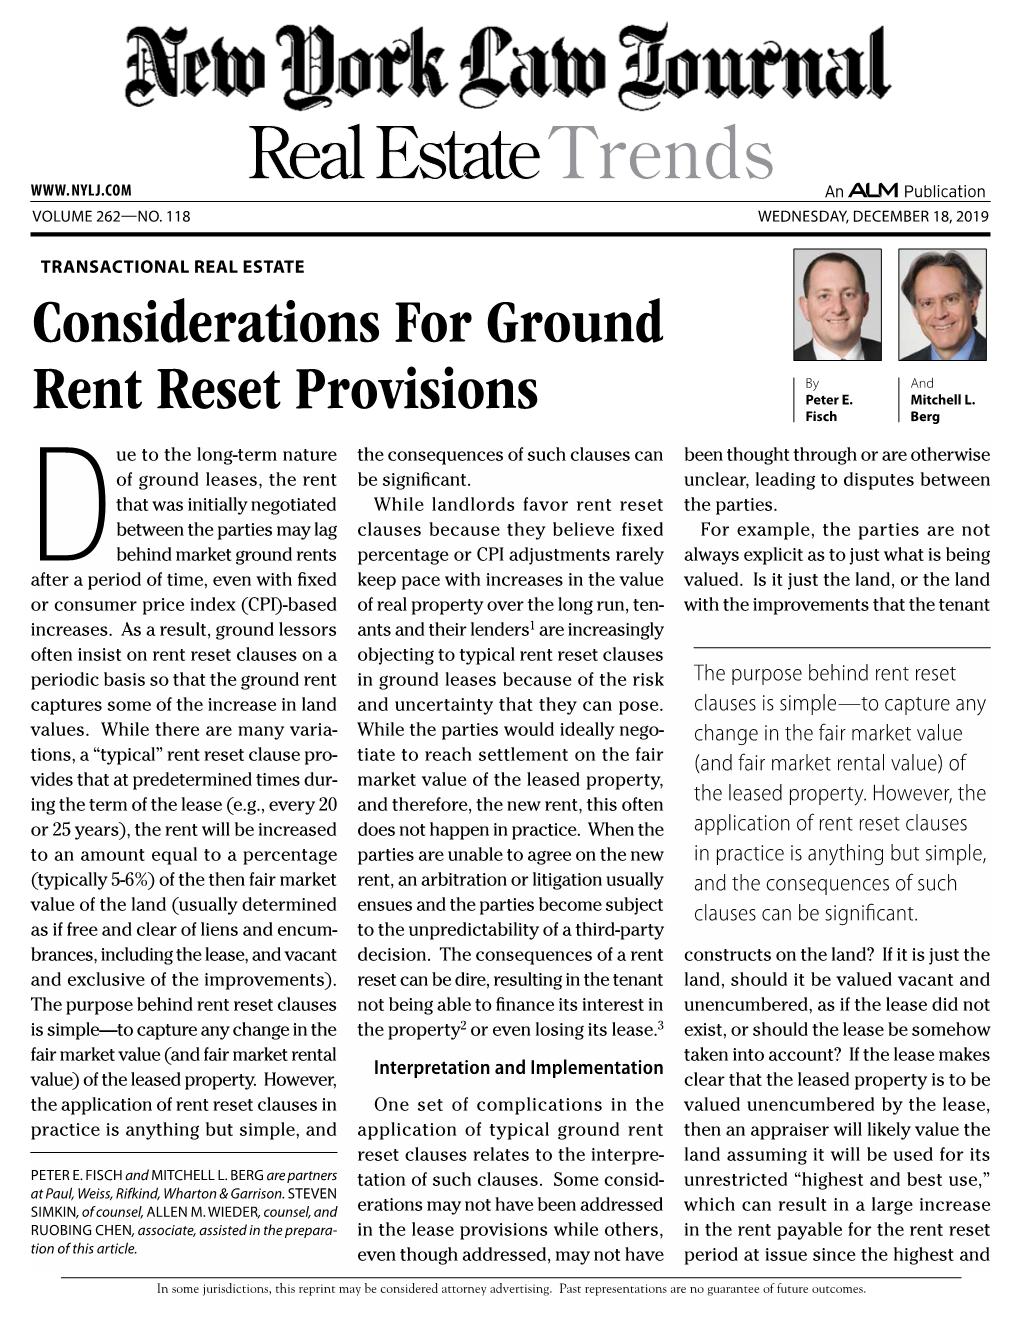 Considerations for Ground Rent Reset Provisions